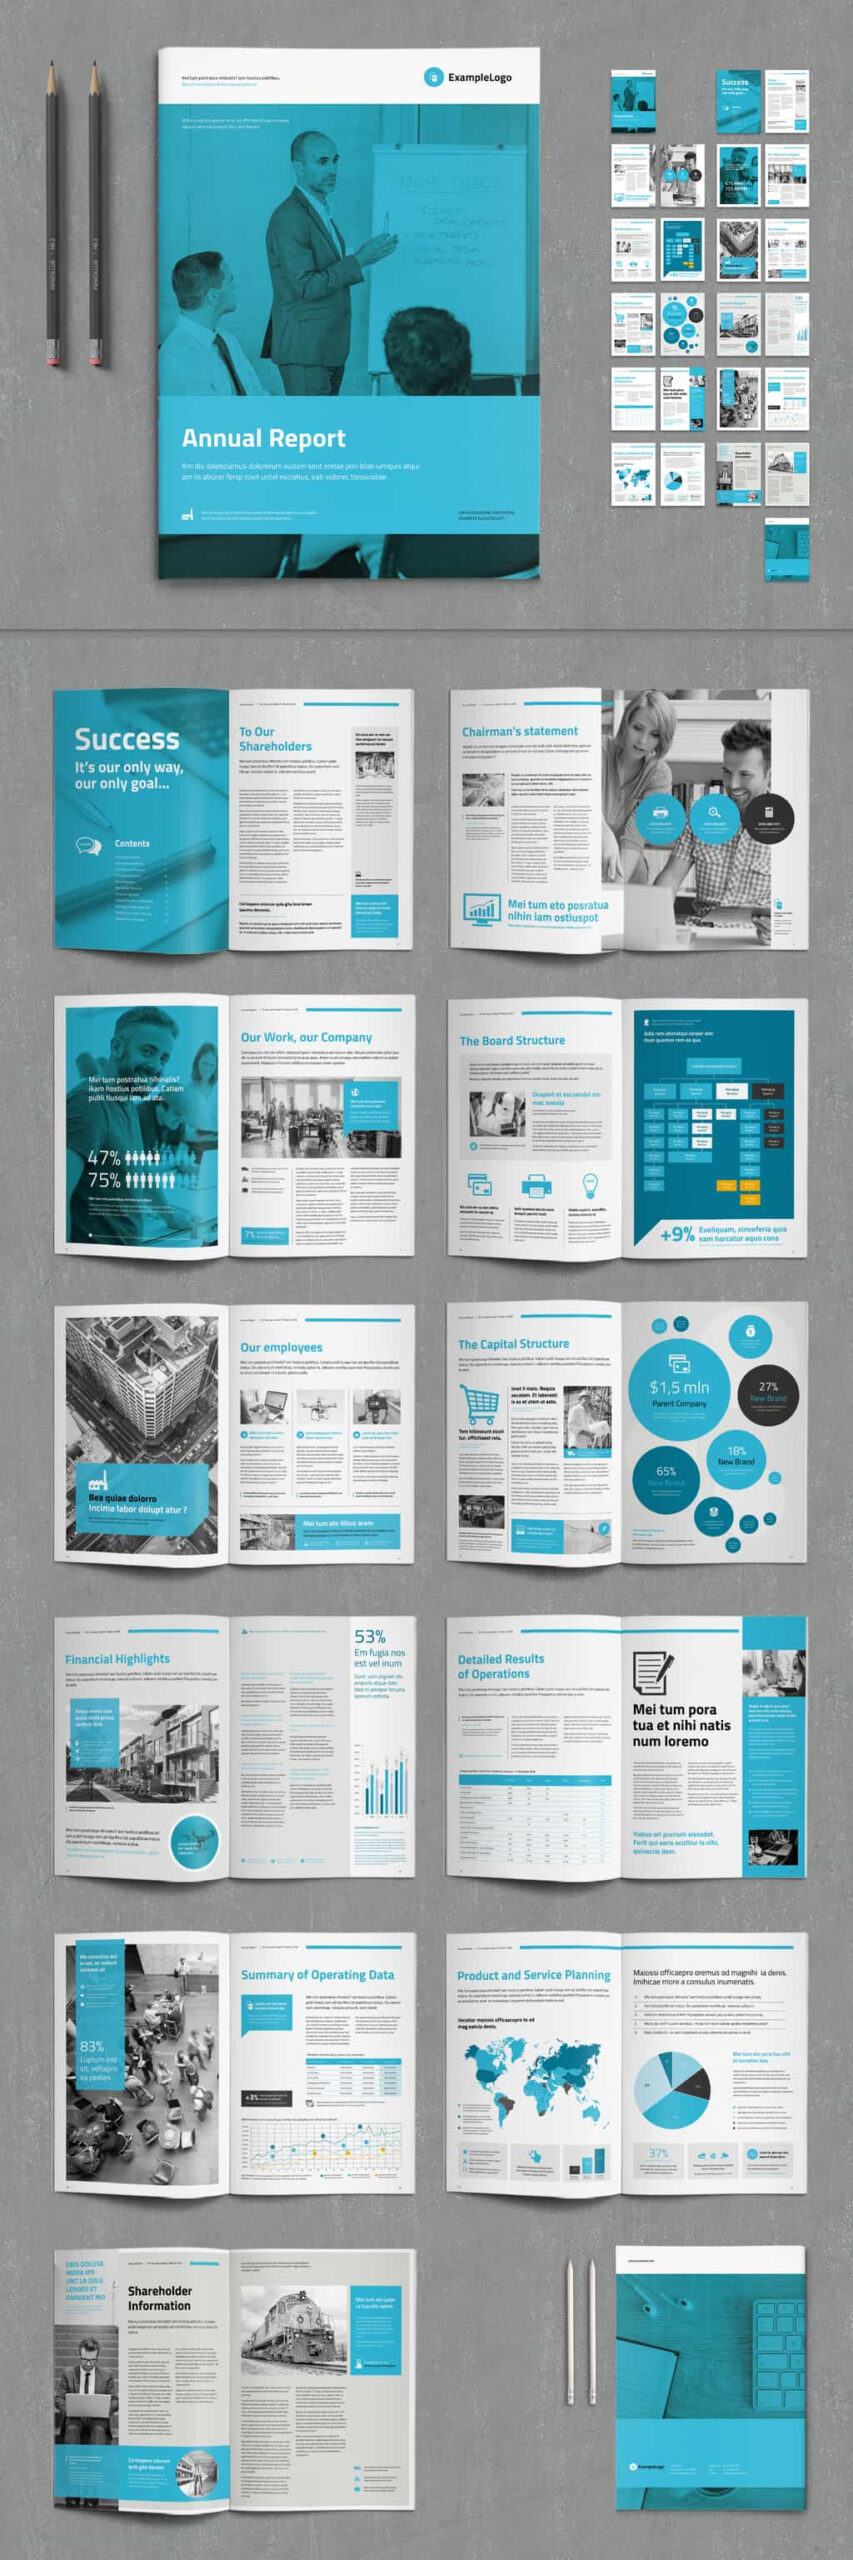 10 Modern Annual Report Design Templates [Free And Paid]  Redokun  For Chairman’s Annual Report Template